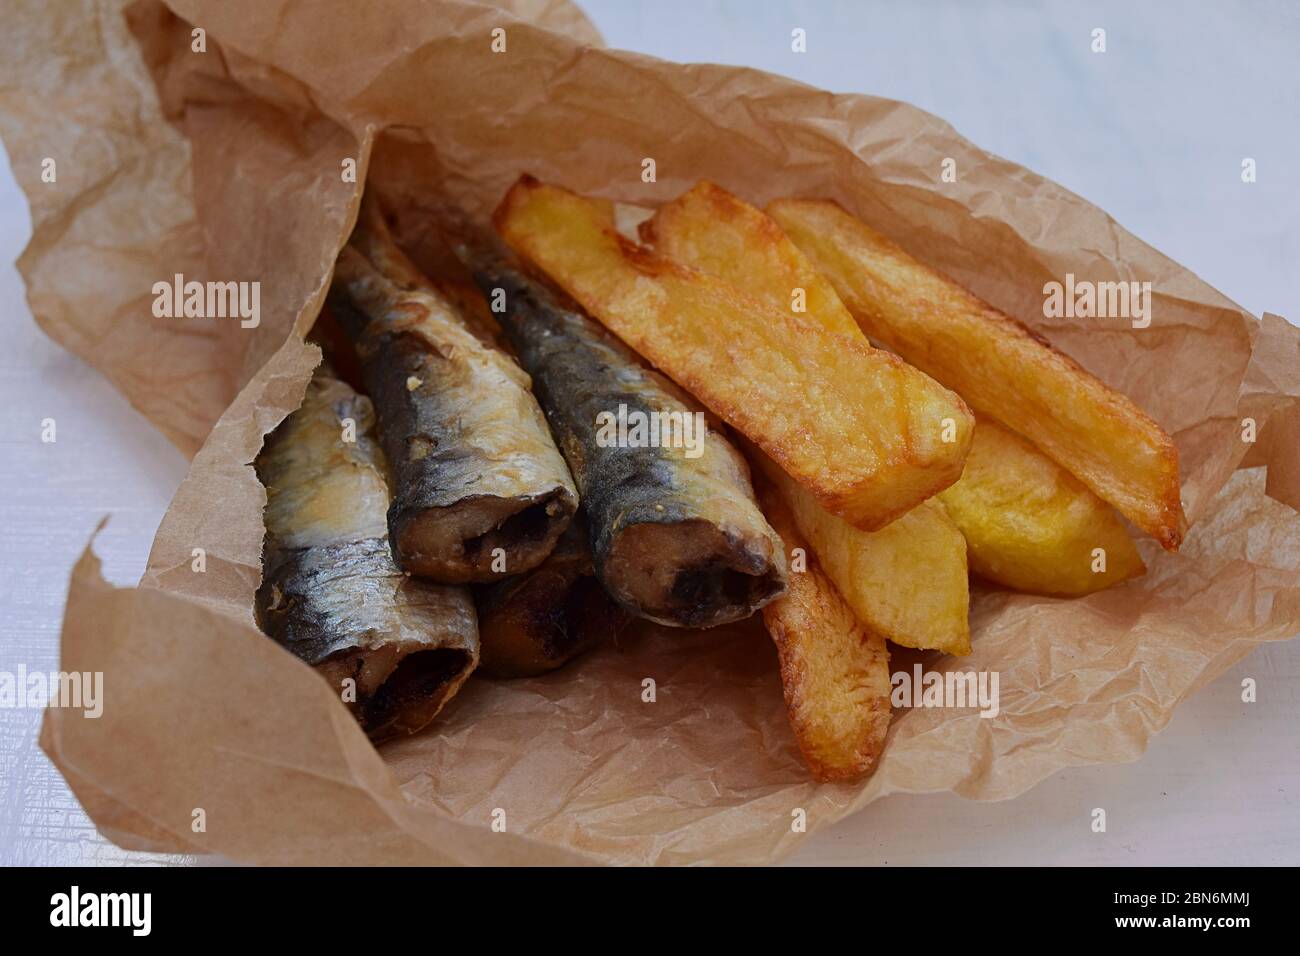 Fish and chips in a paper wrapper/ Yummy takeaway food/ Classic British fish and chips/ fast food Stock Photo